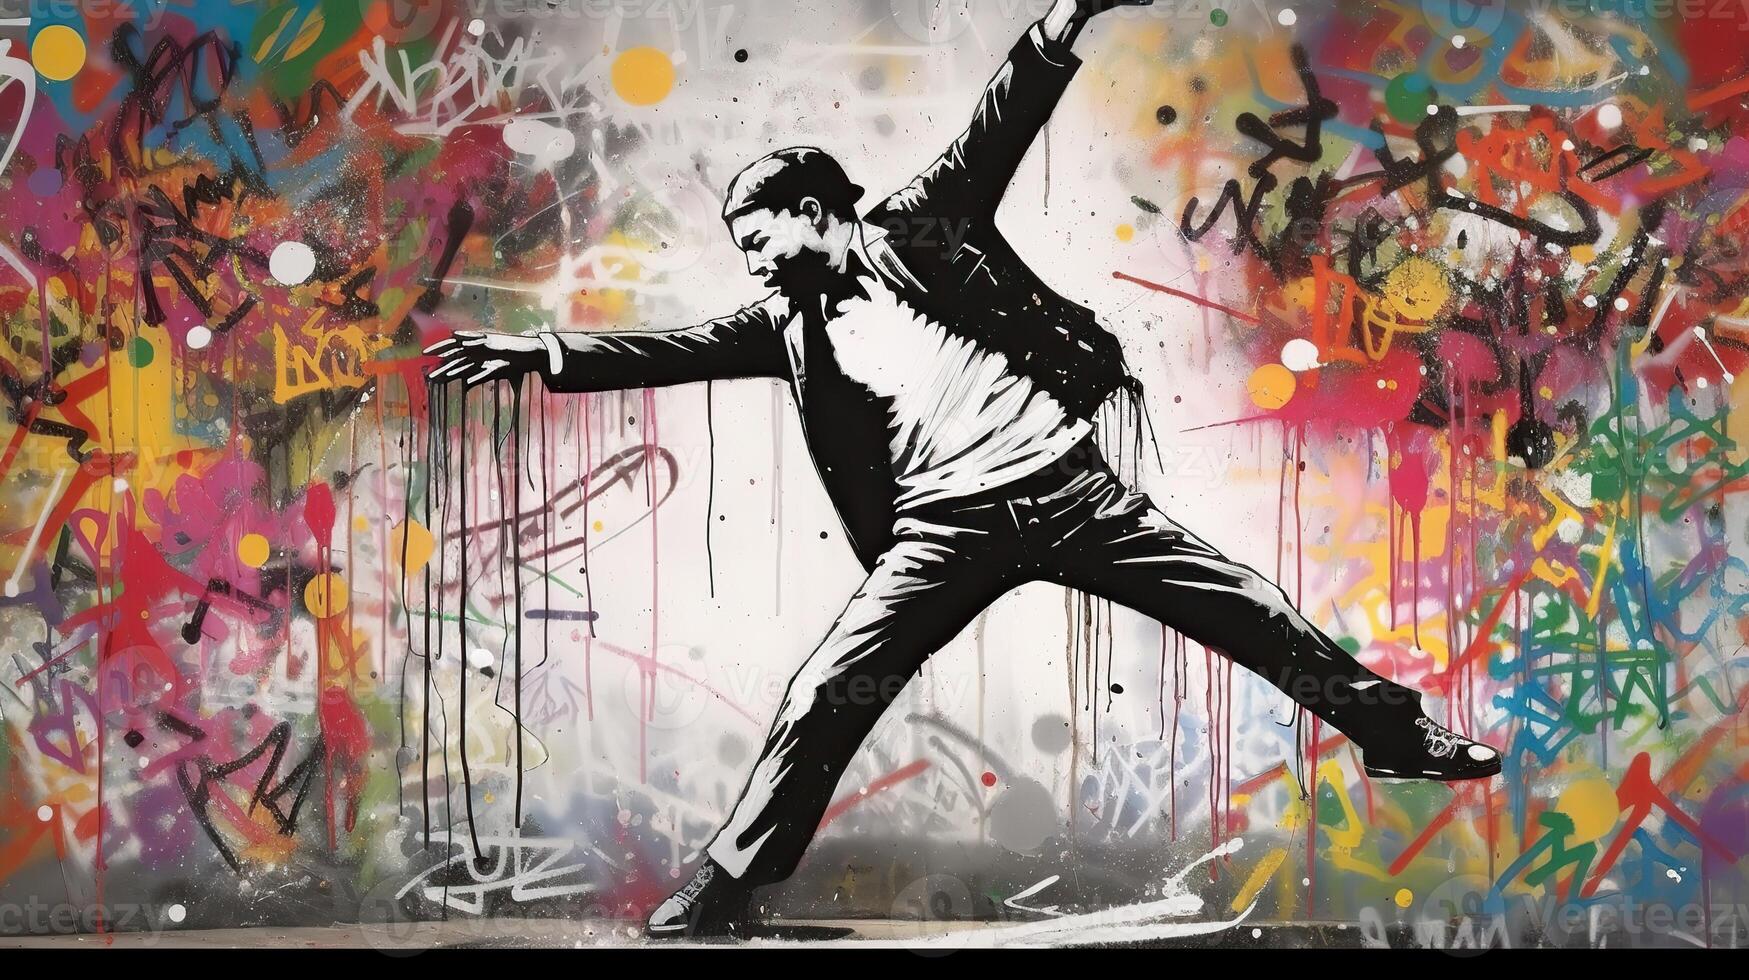 . . Street art graffiti of dancing person music rhythm. Inspired by Banksy underground culture. Graphic Art photo